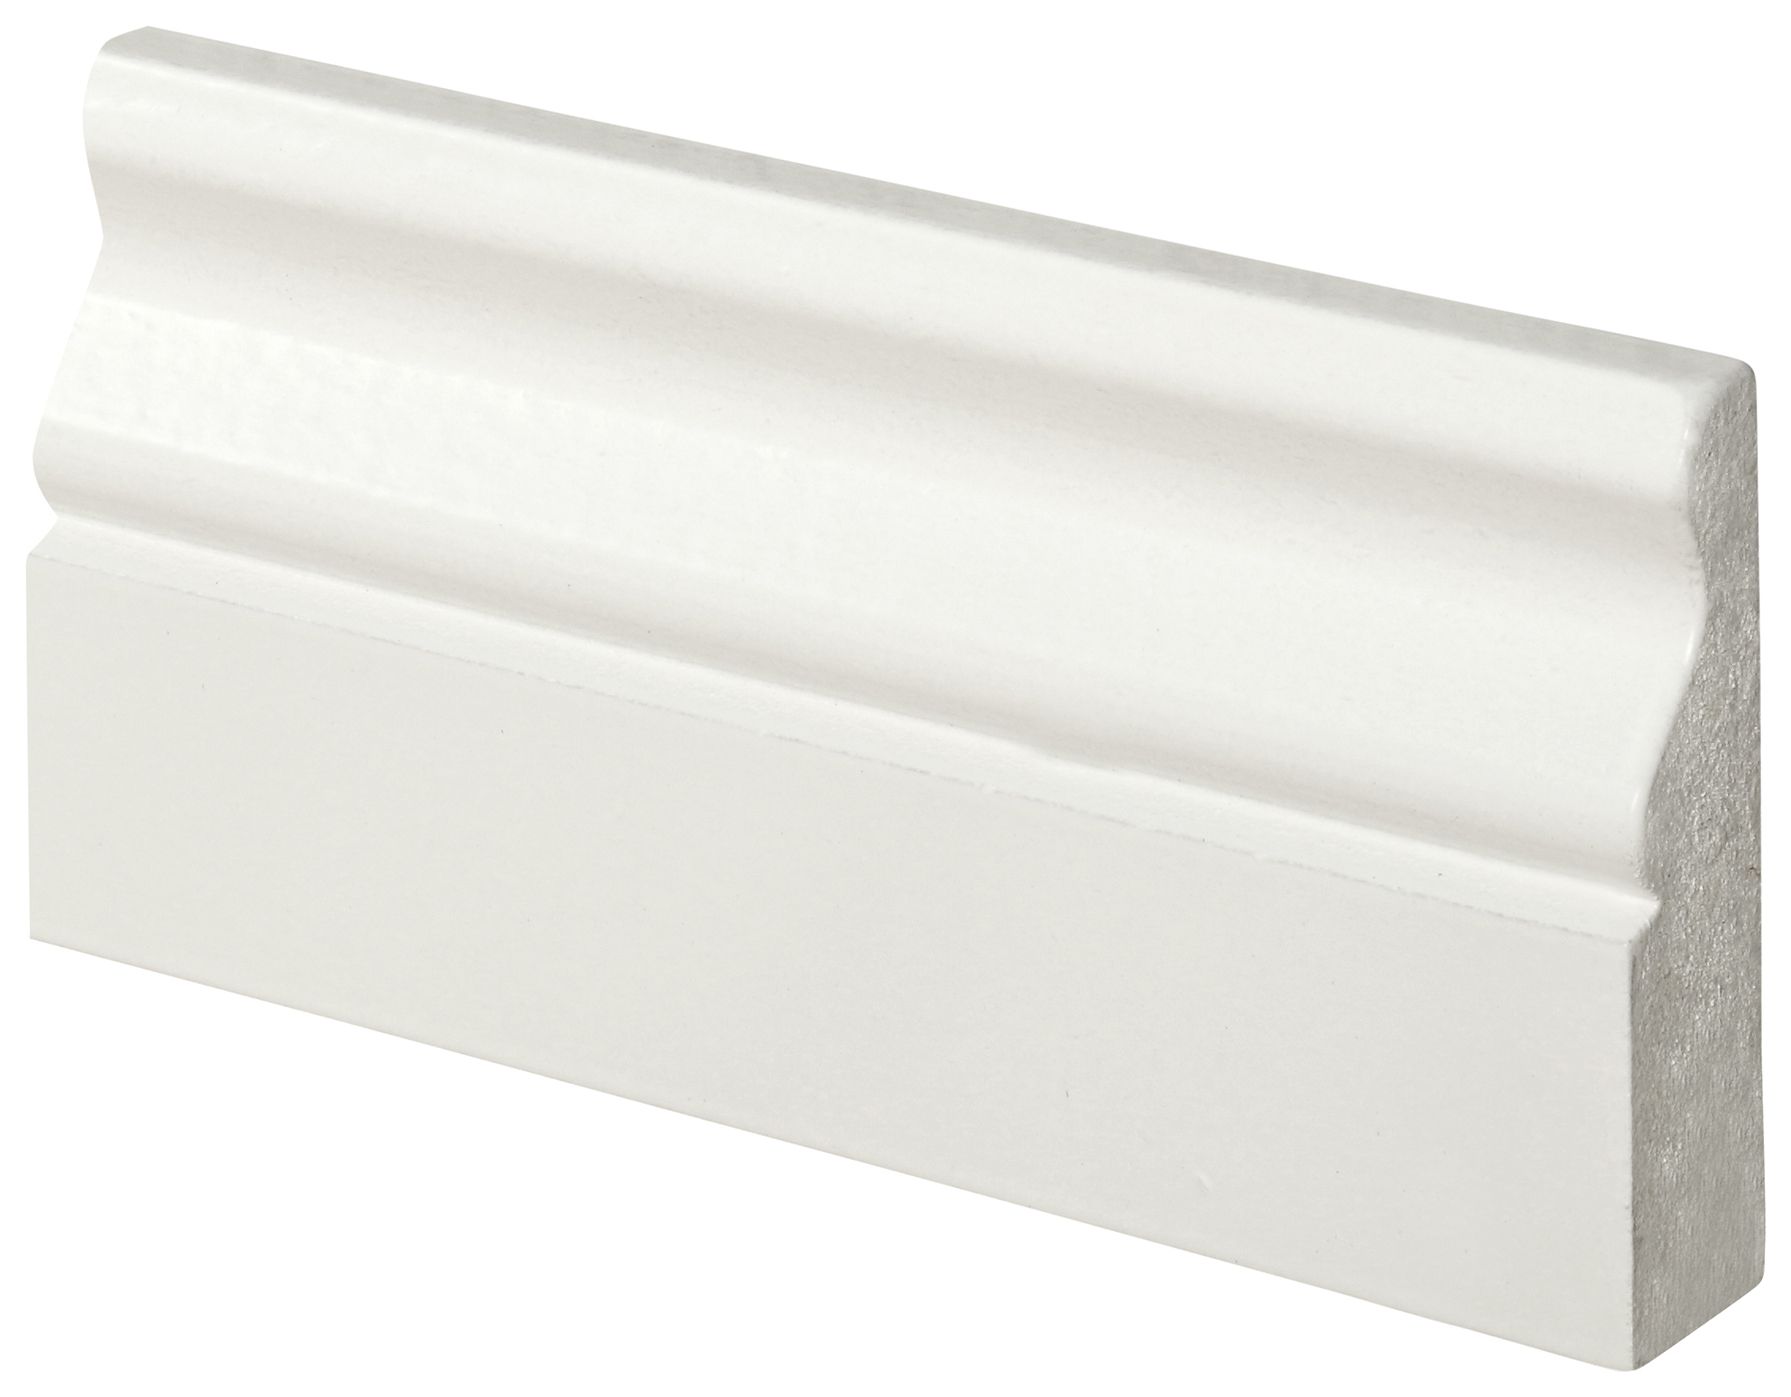 Wickes Ogee Fully Finished Architrave - 18 x 69 x 2100mm